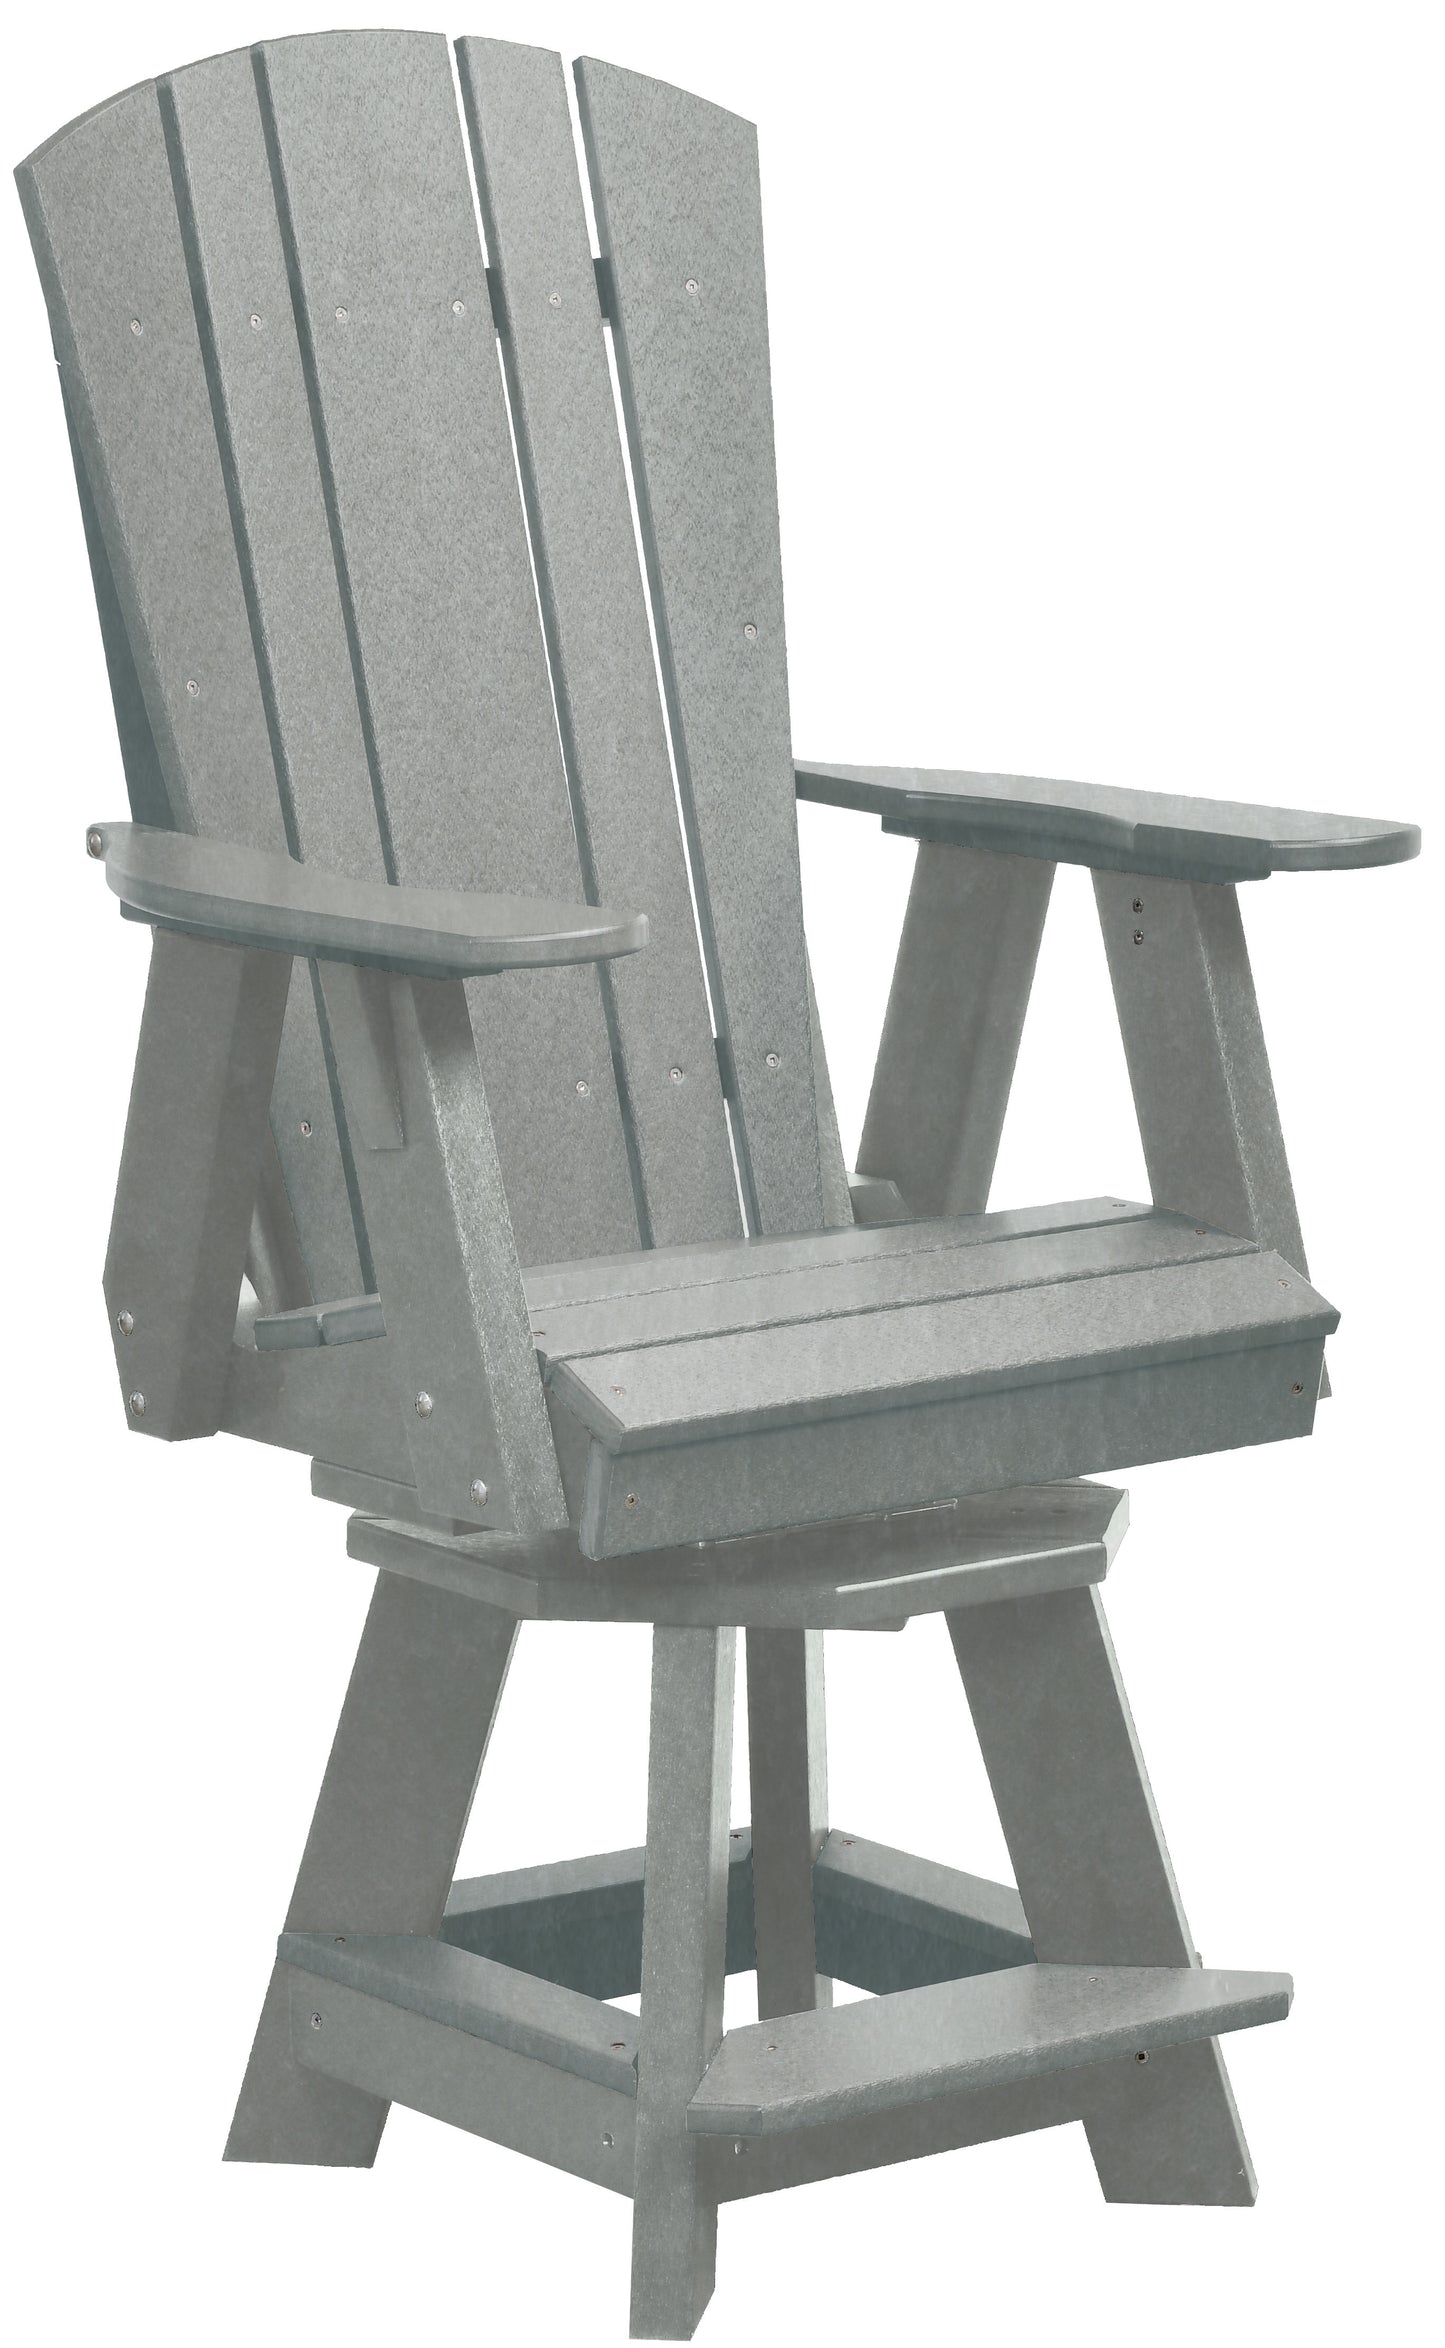 Wildridge Recycled Plastic Heritage Balcony Swivel Chair (Counter Height) - LEAD TIME TO SHIP 4 WEEKS